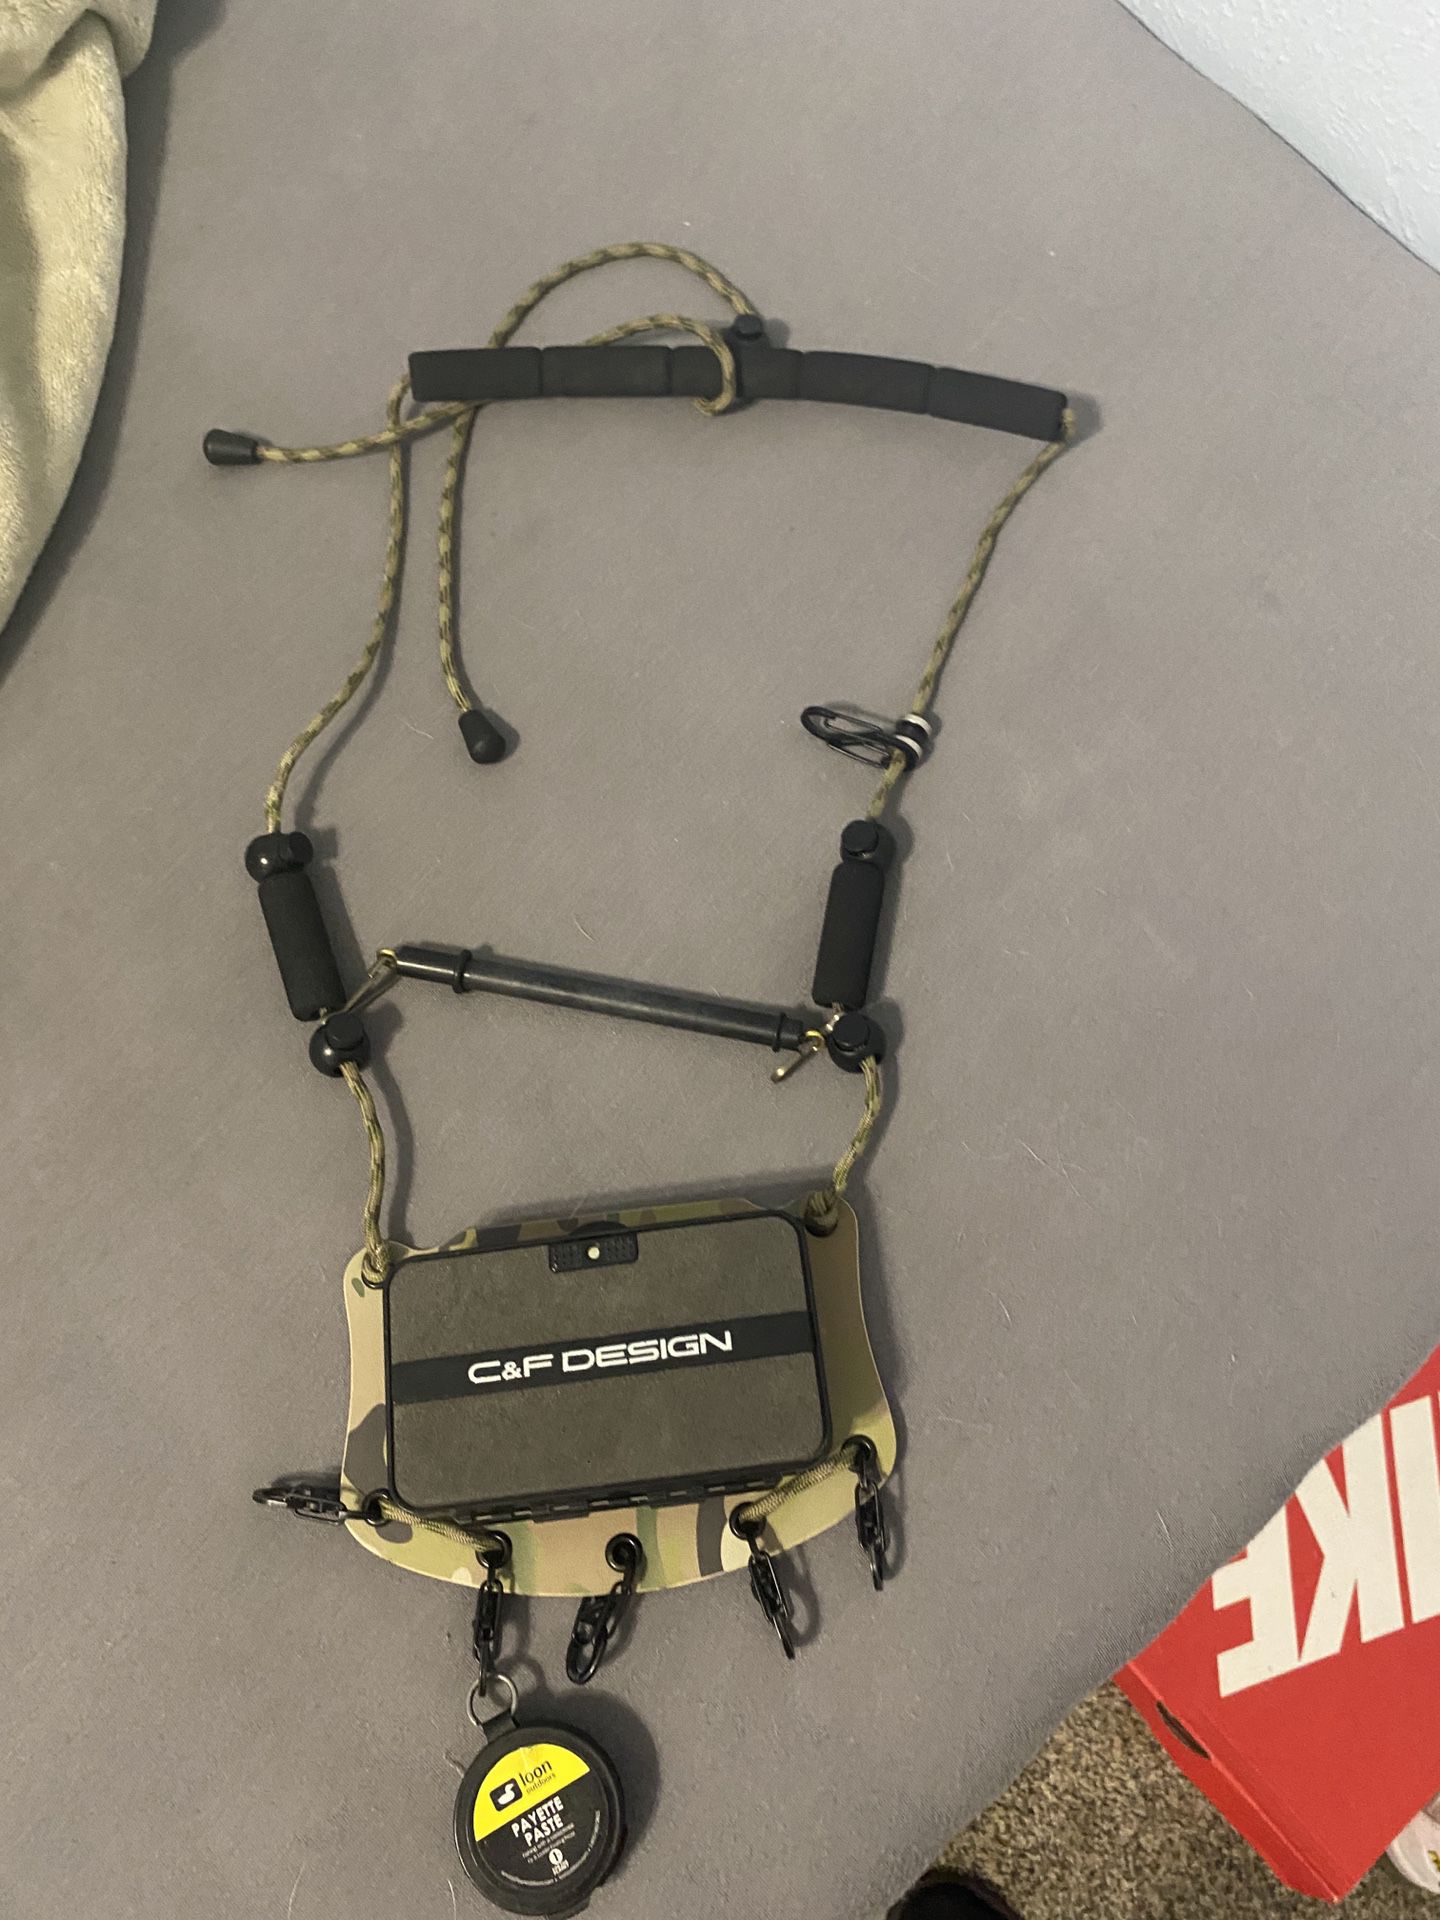 Golden Trout Fly Fishing Lanyard for Sale in Carrollton, TX - OfferUp